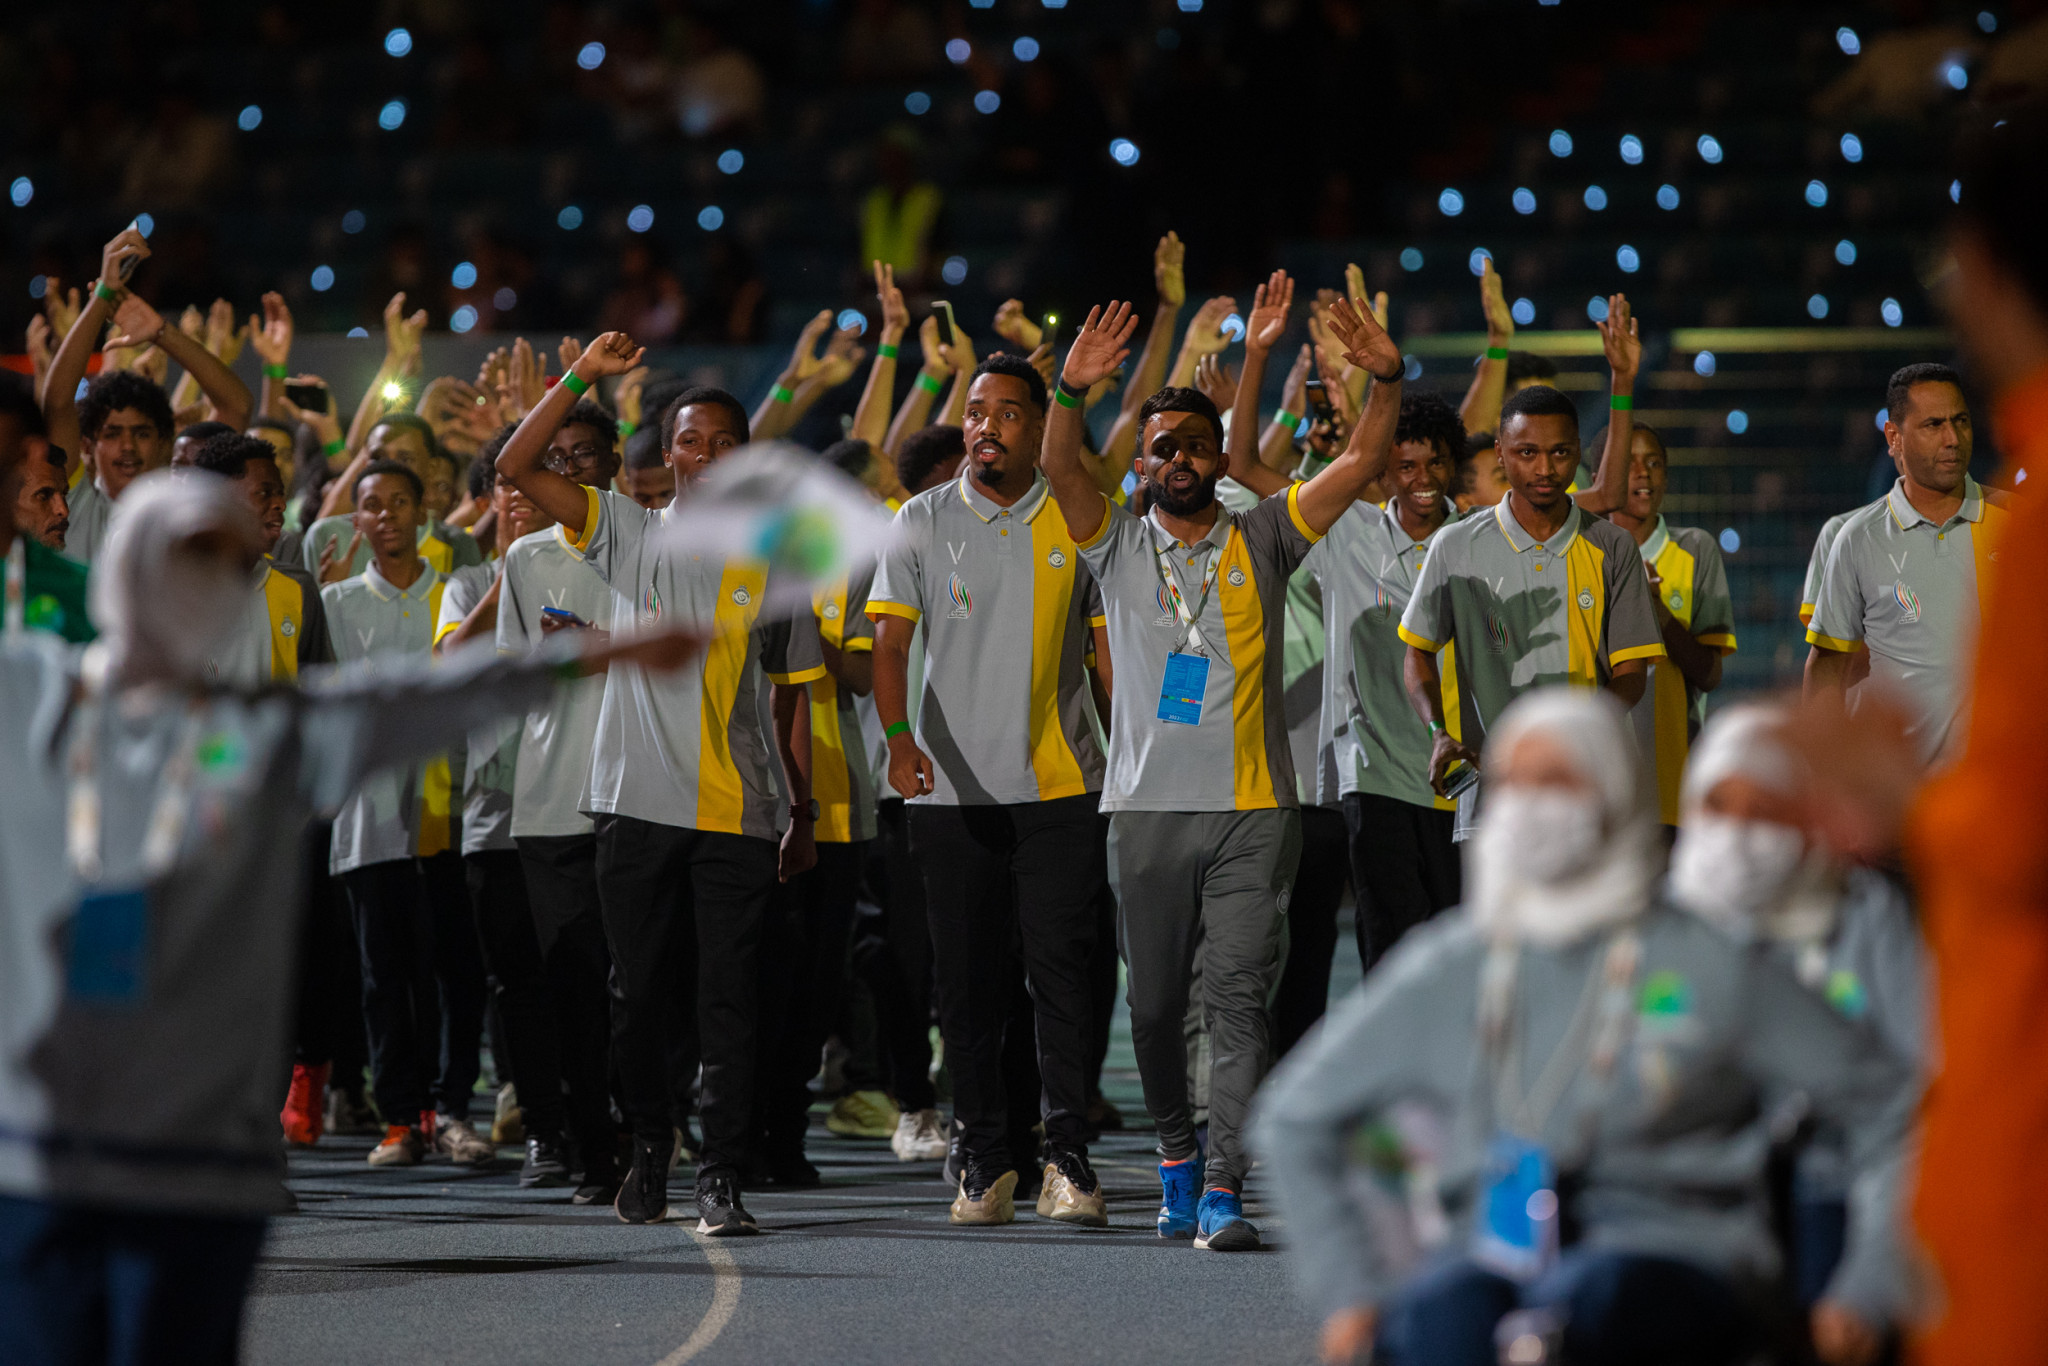 More than 6,000 athletes from several clubs took part in the Athlete Parade ©Saudi Games